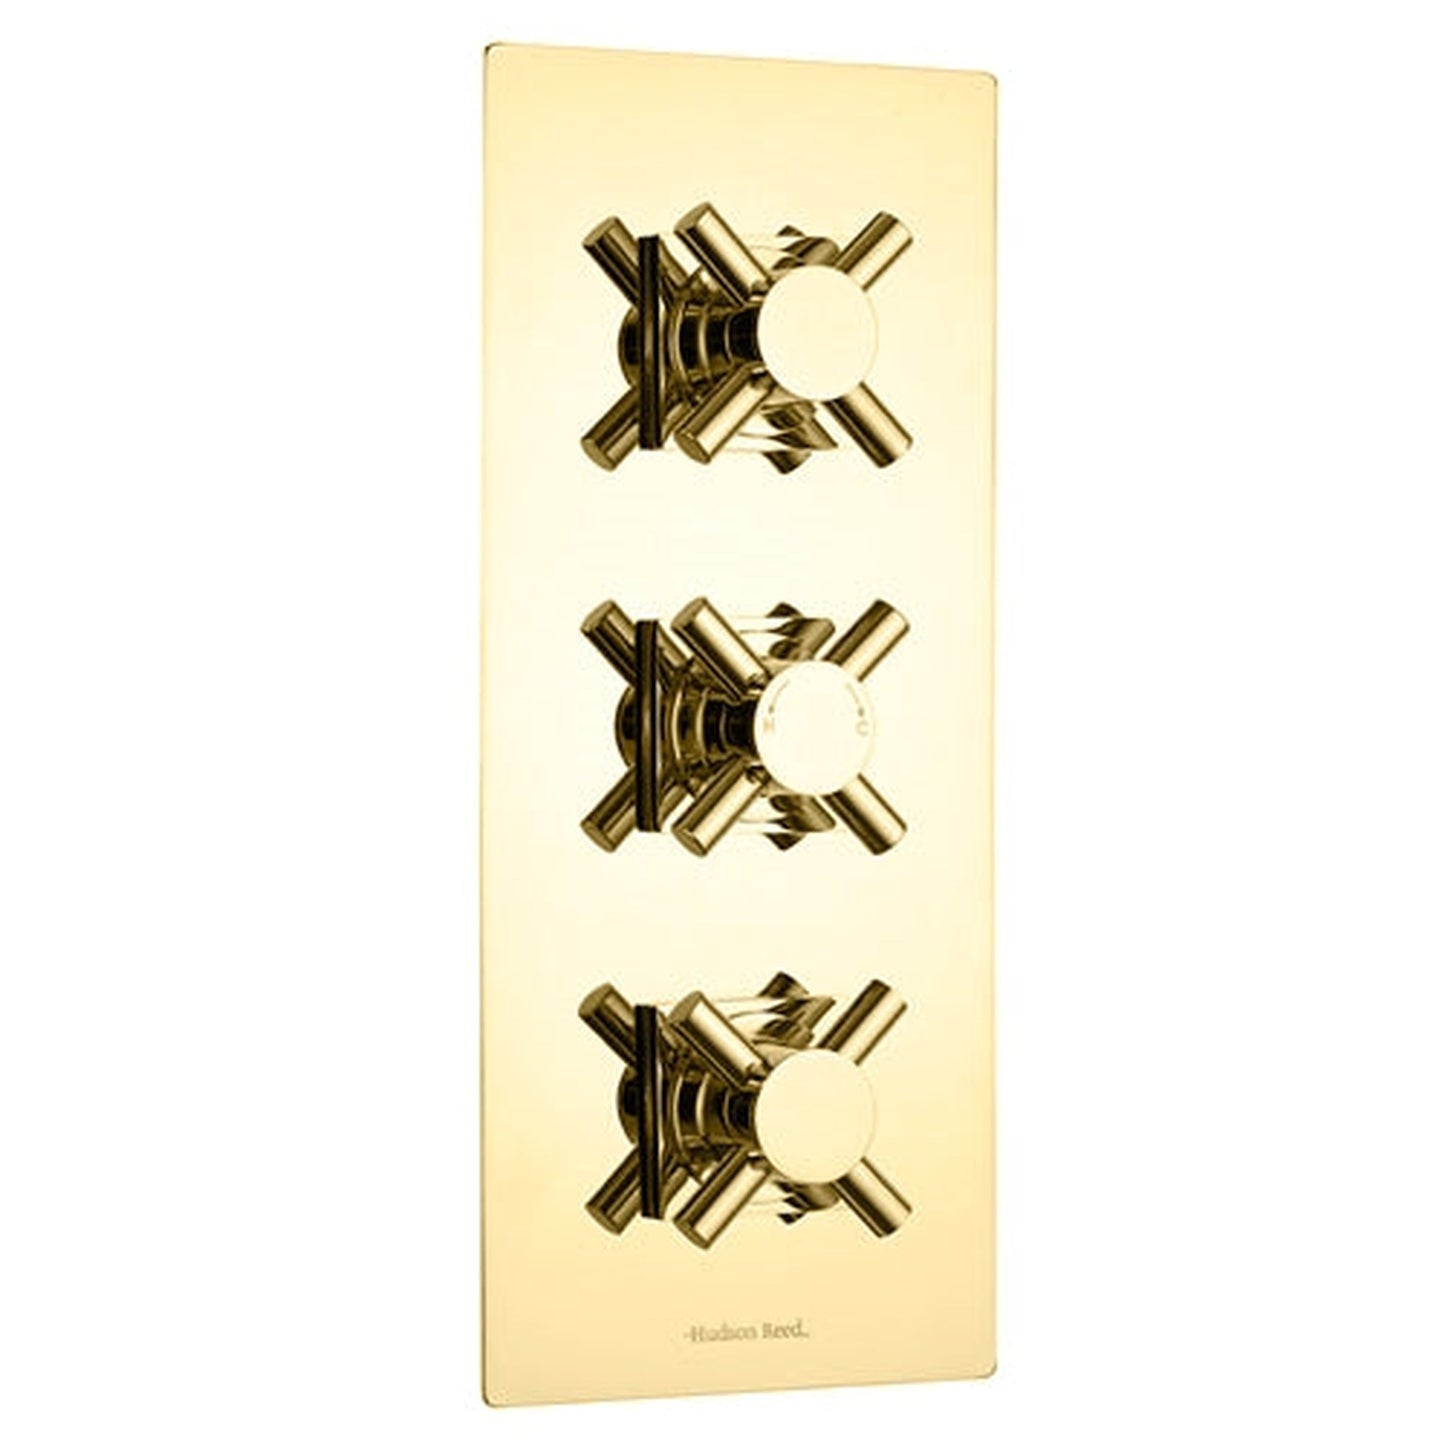 Fontana Reno 12" Gold Square Ceiling Mounted Rainfall Shower System With 6-Body Massage Jets and Hand Shower